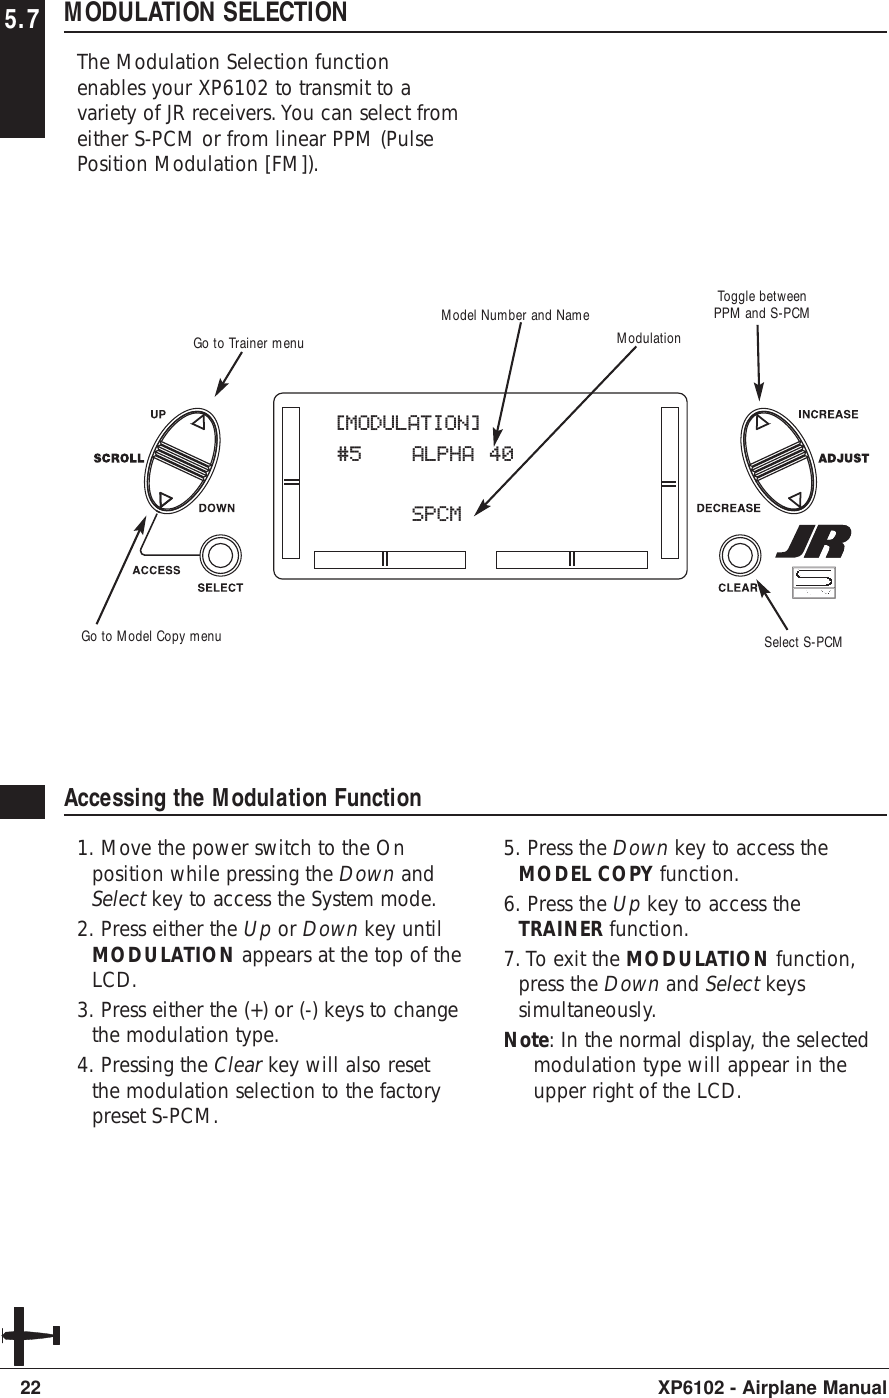 22 XP6102 - Airplane Manual5.7 MODULATION SELECTIONThe Modulation Selection functionenables your XP6102 to transmit to avariety of JR receivers. You can select fromeither S-PCM or from linear PPM (PulsePosition Modulation [FM]).Accessing the Modulation Function1. Move the power switch to the Onposition while pressing the Down andSelect key to access the System mode.2. Press either the Up or Down key untilMODULATION appears at the top of theLCD.3. Press either the (+) or (-) keys to changethe modulation type.4. Pressing the Clear key will also resetthe modulation selection to the factorypreset S-PCM.5. Press the Down key to access theMODEL COPY function.6. Press the Up key to access theTRAINER function.7. To exit the MODULATION function,press the Down and Select keyssimultaneously.Note: In the normal display, the selectedmodulation type will appear in theupper right of the LCD.[MODULATION]#5 ALPHA 40SPCMModulationModel Number and NameSelect S-PCMGo to Trainer menuGo to Model Copy menuToggle betweenPPM and S-PCM